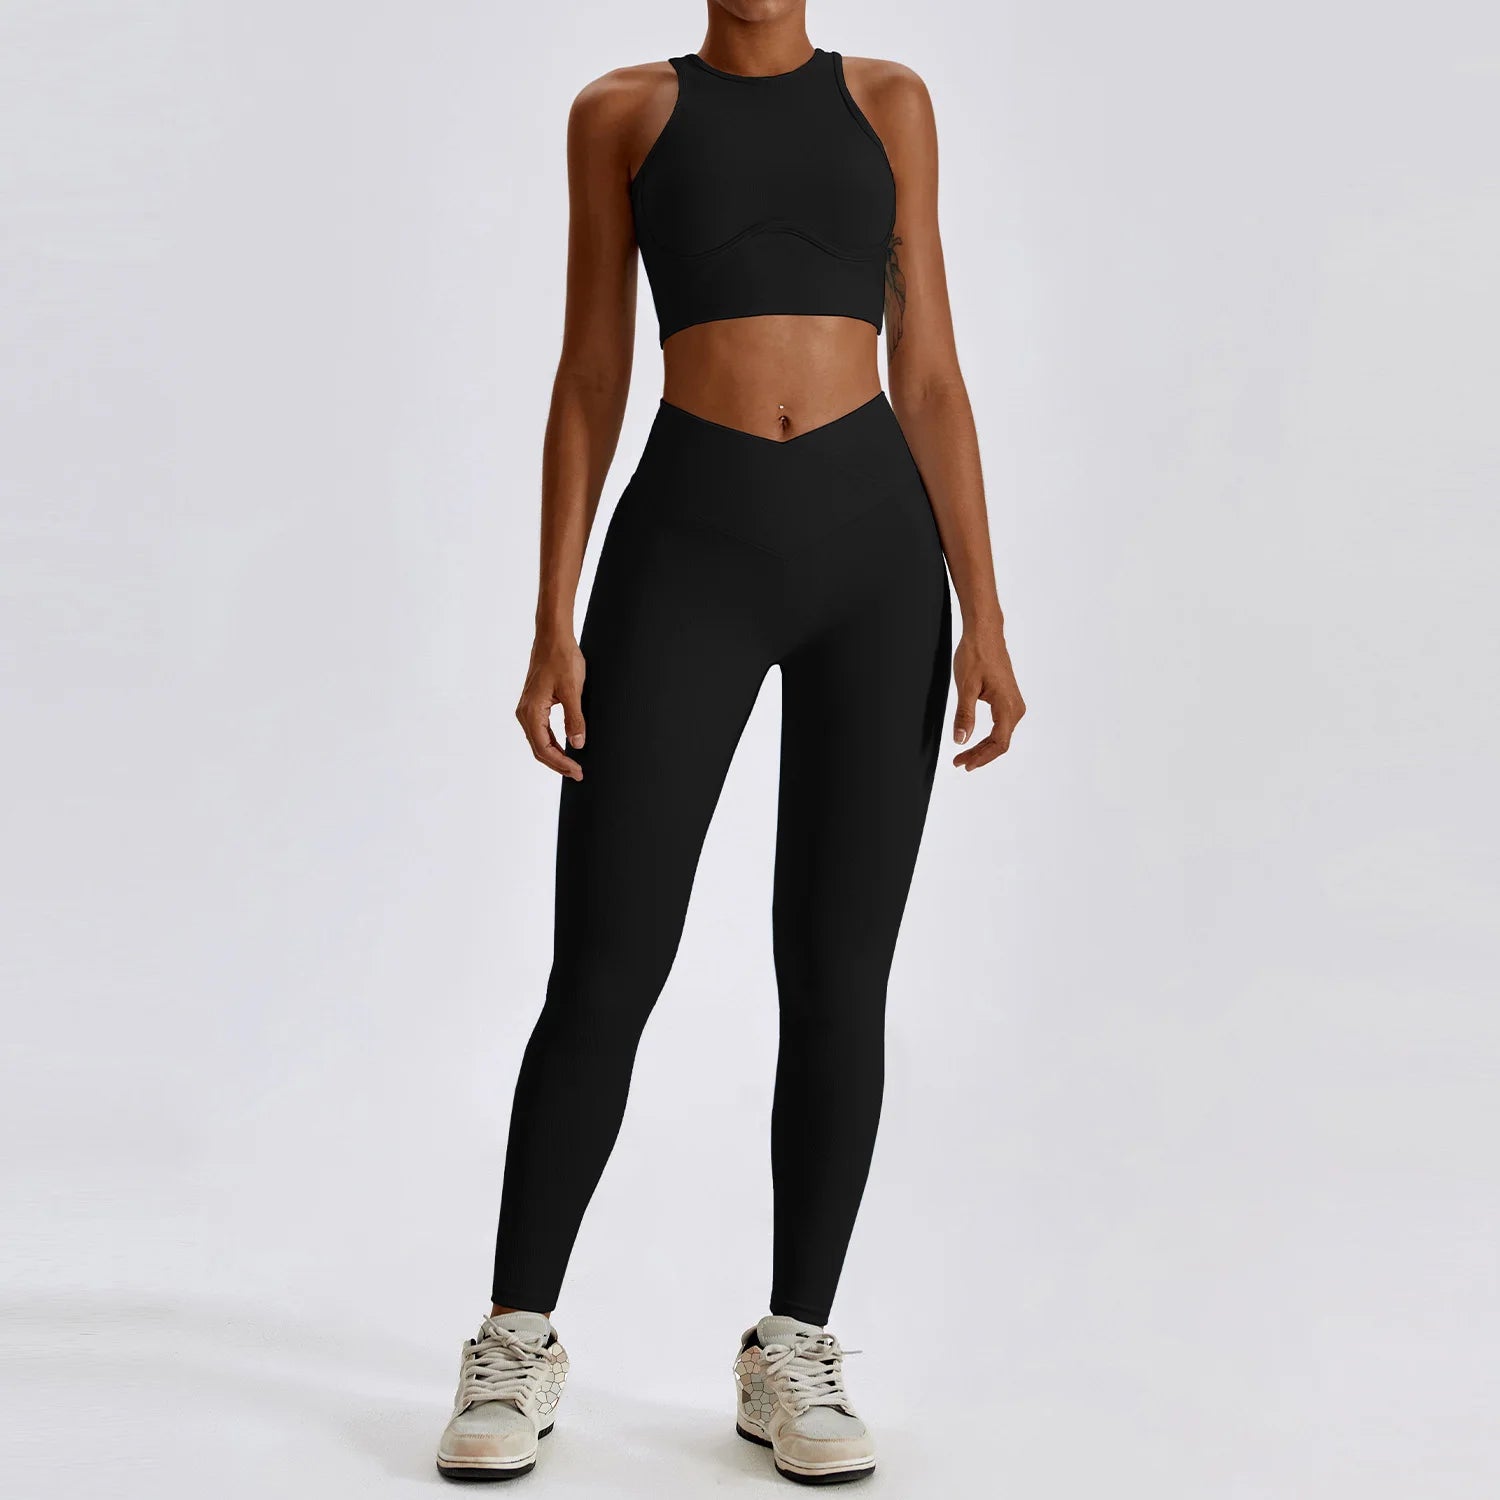 Toni - Black Seamless Sportswear V-Front Legging and High Neck Crop Top